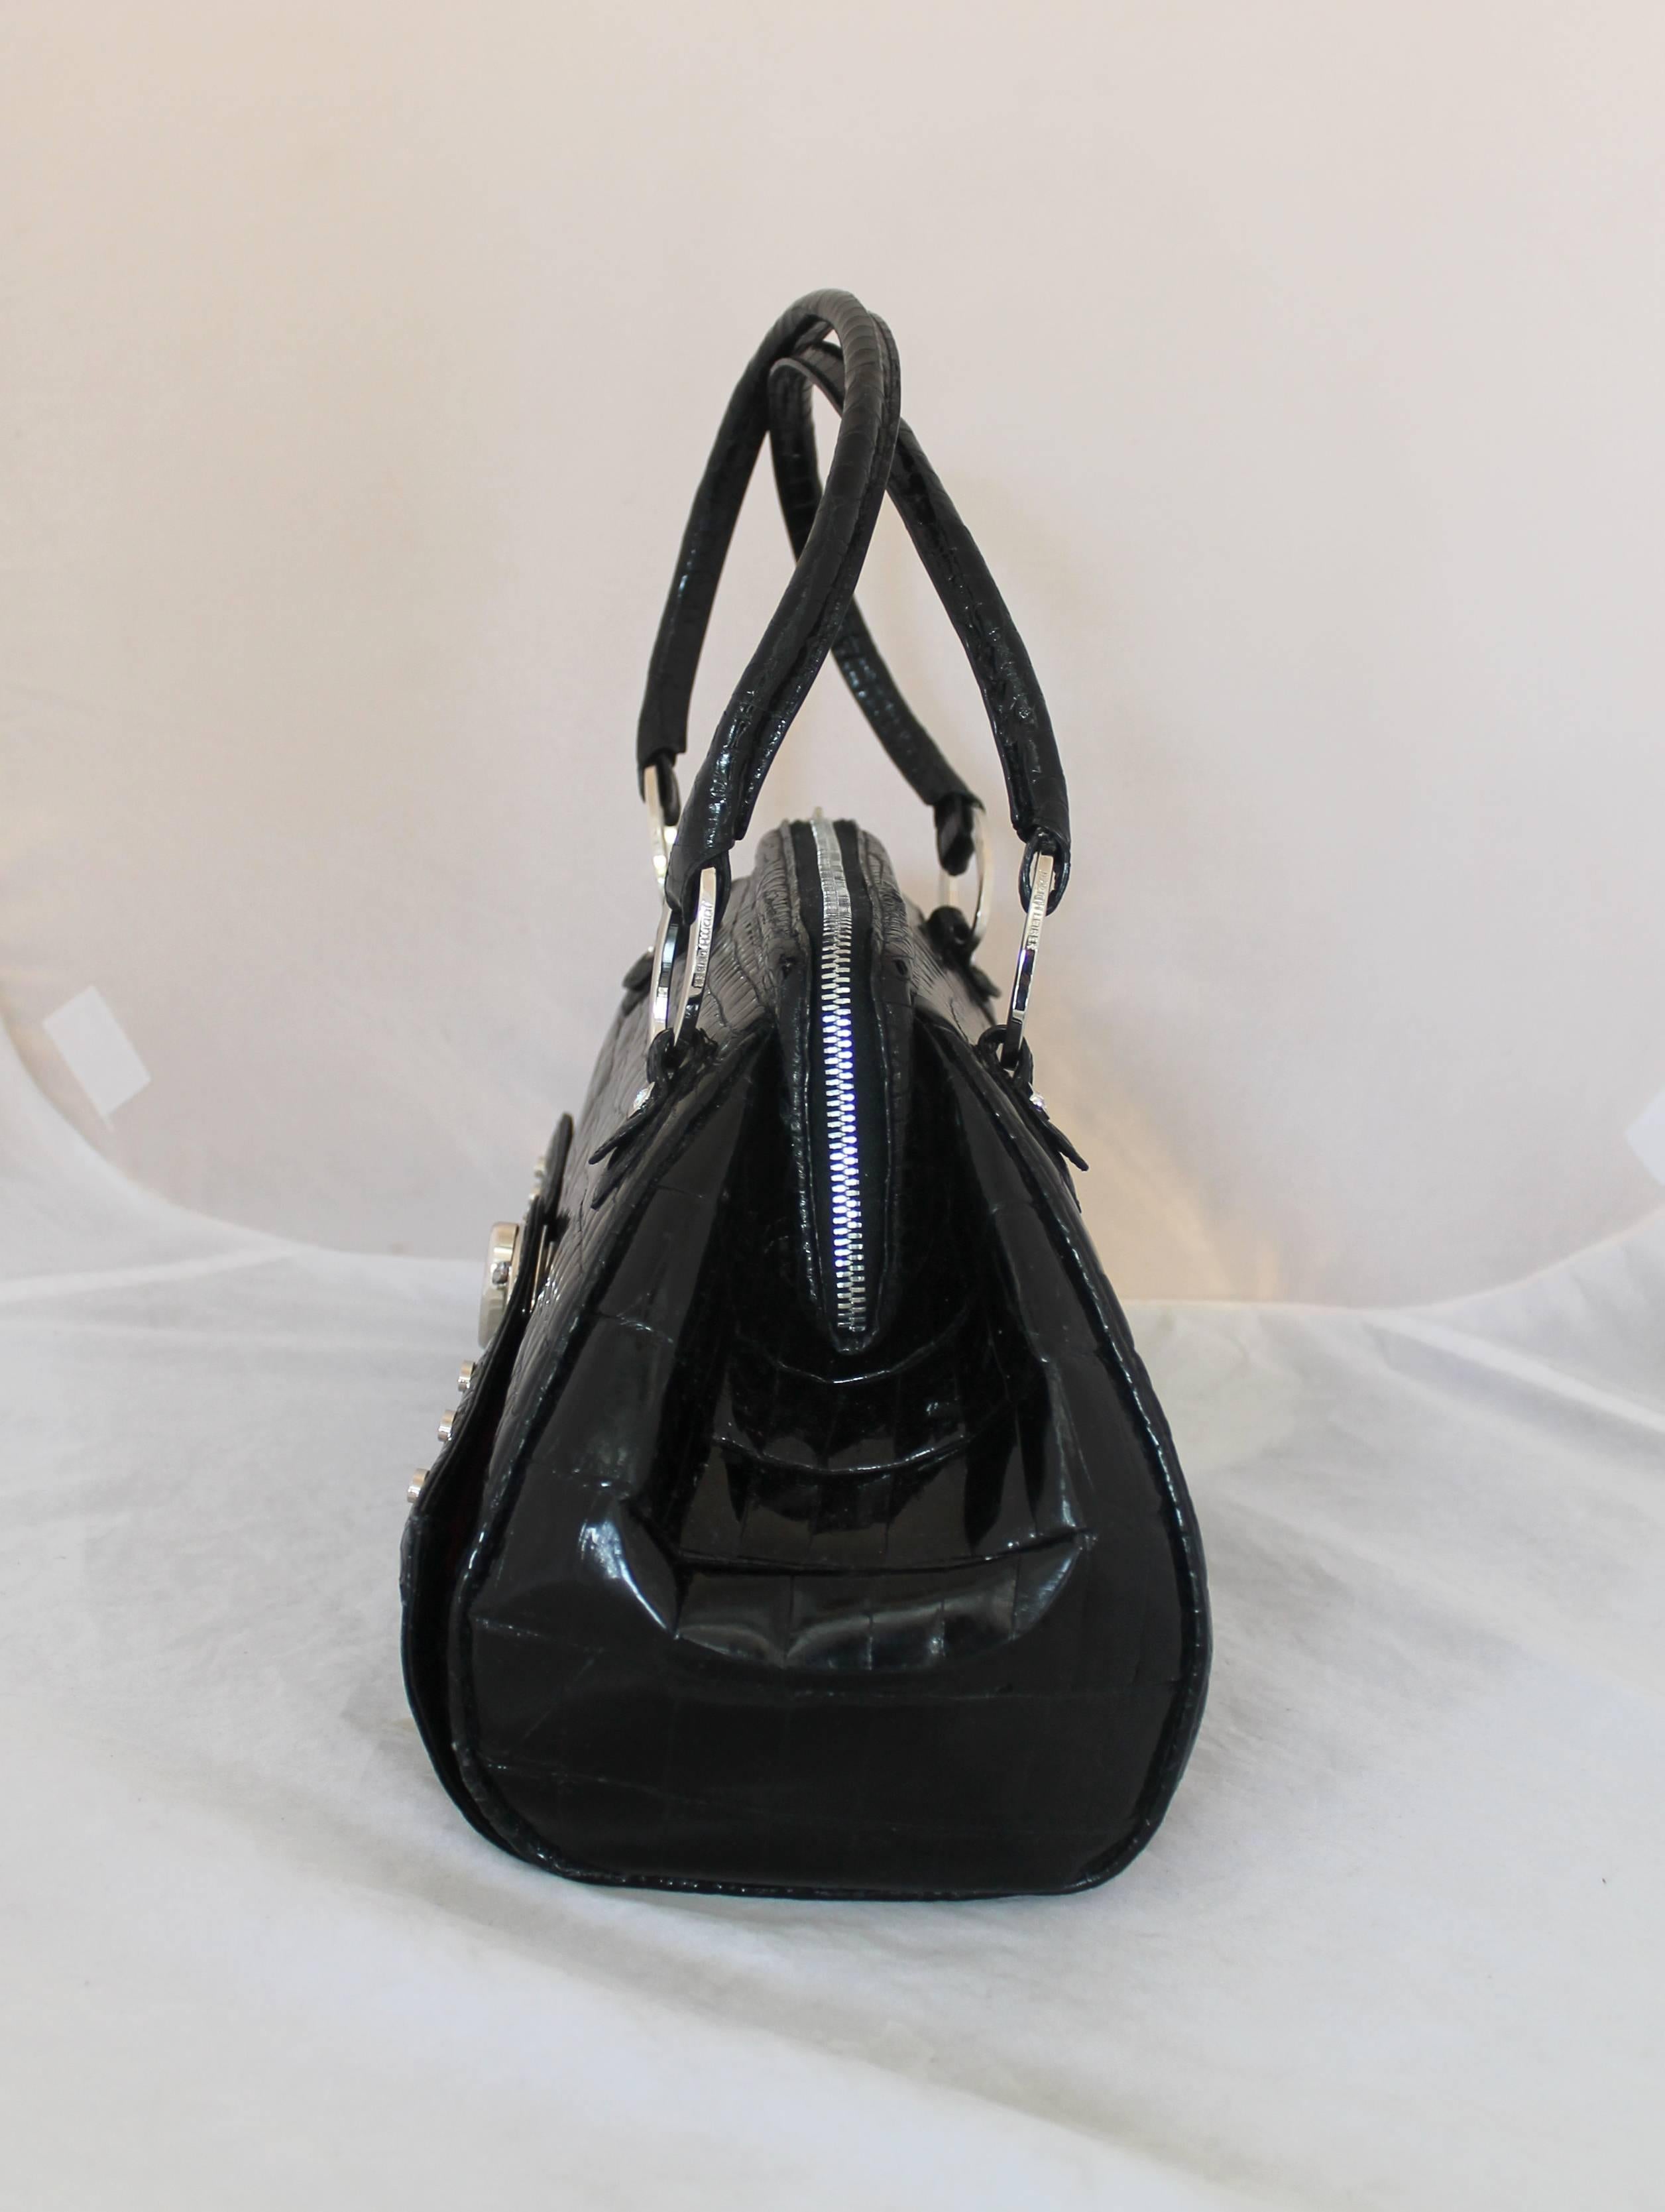 Judith Leiber Black Crocodile Shoulder Bag

This bag is in excellent condition with minor water marks on it. It has silver hardware and small silver studs in the front of the bag. The zipper clasp also has rhinestones on the edge of it. It has a